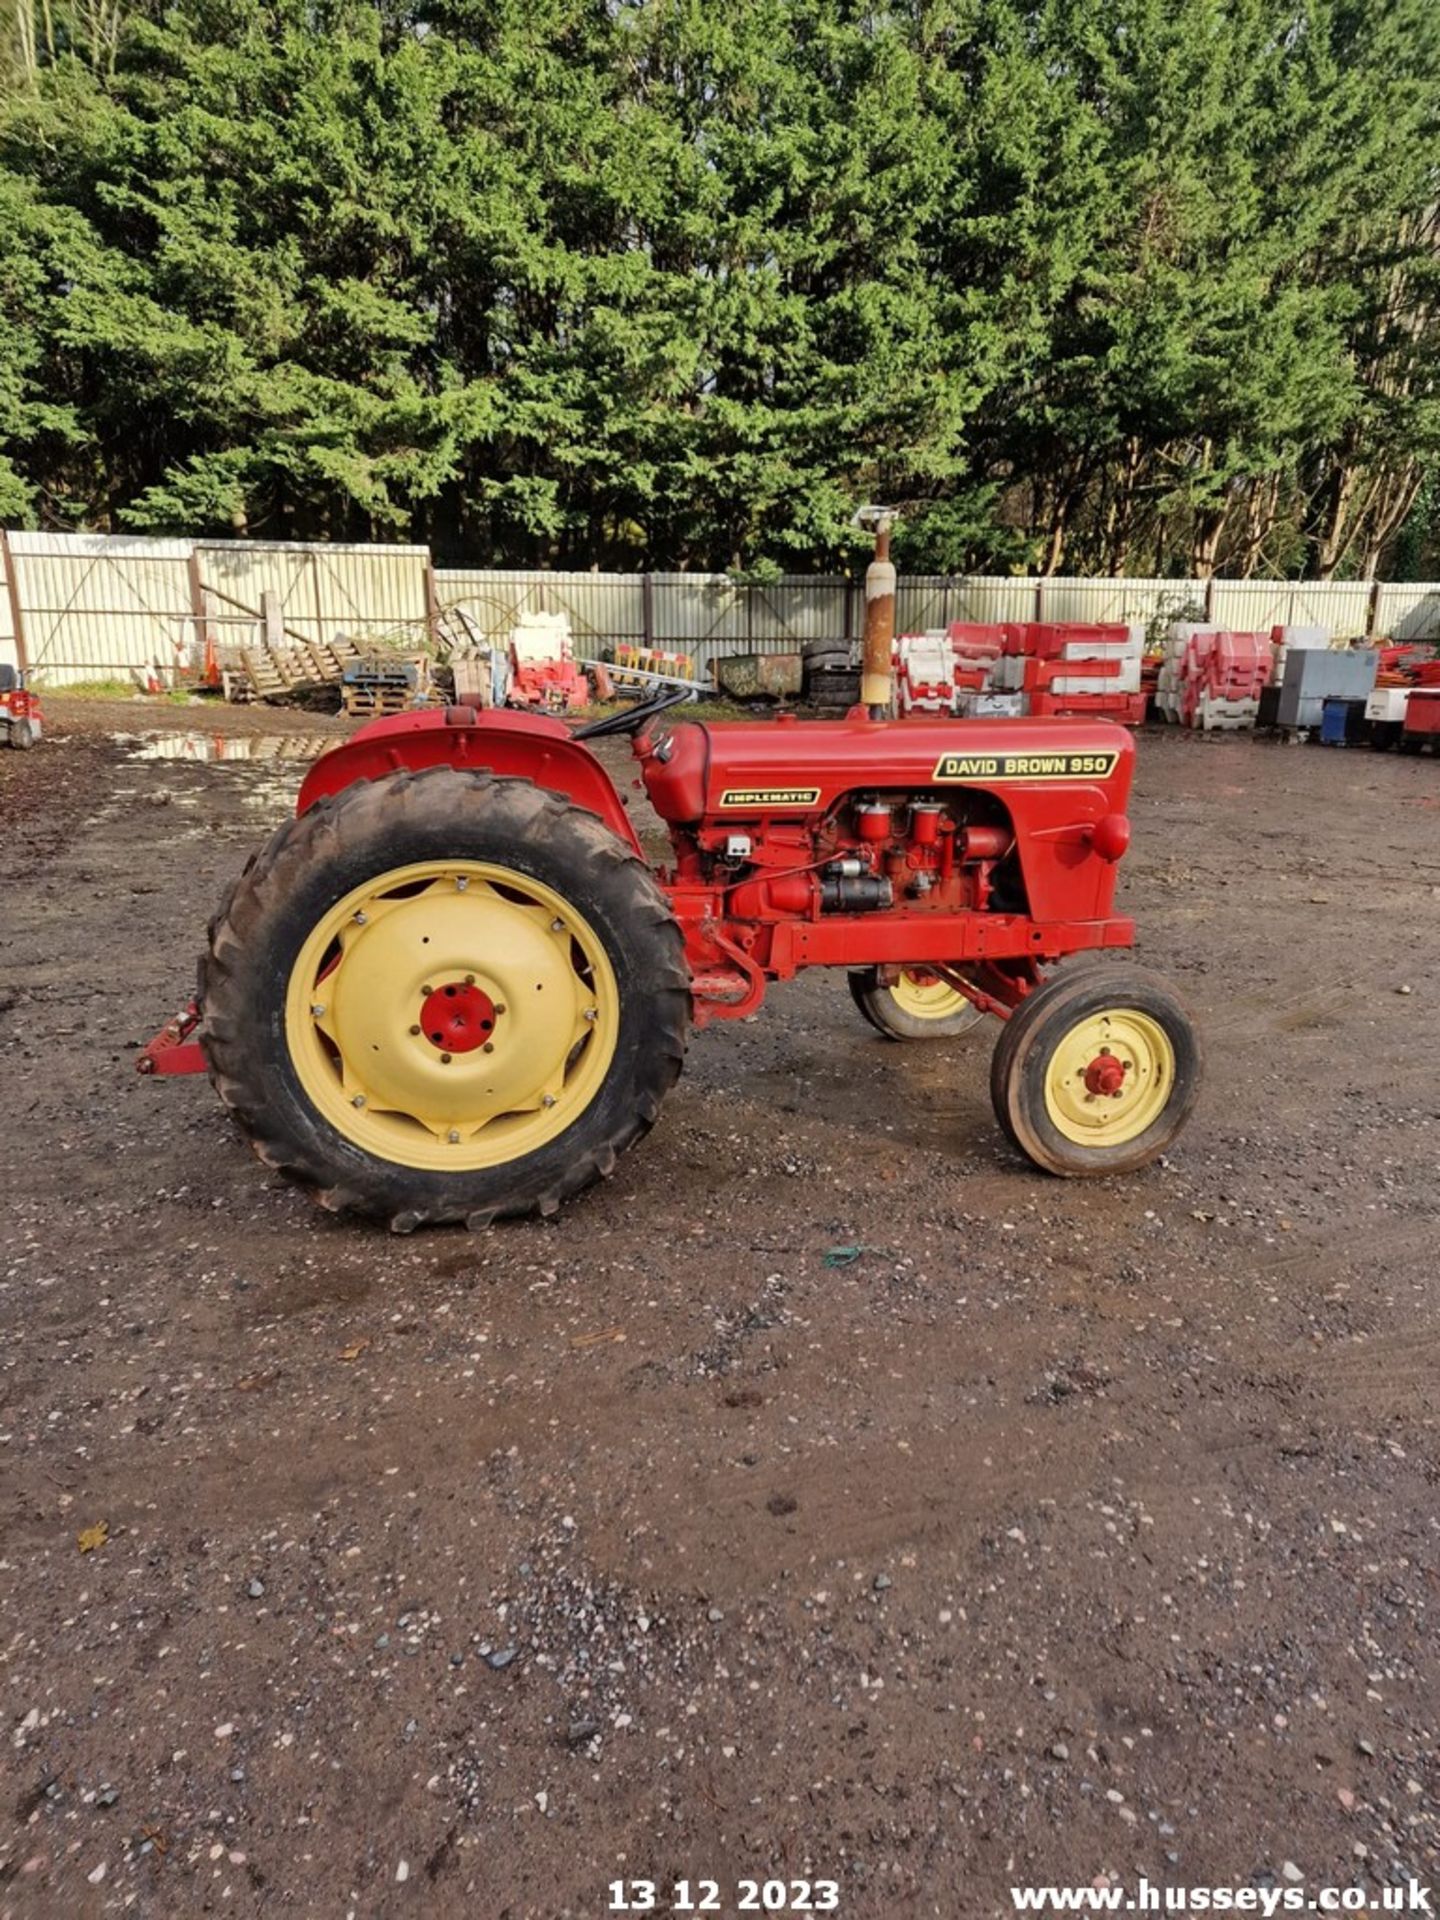 DAVID BROWN 950 IMPLEMATIC TRACTOR VCJ 79 SHOWING AS 1 OWNER ON HPI YEAR 1960 - Image 4 of 6